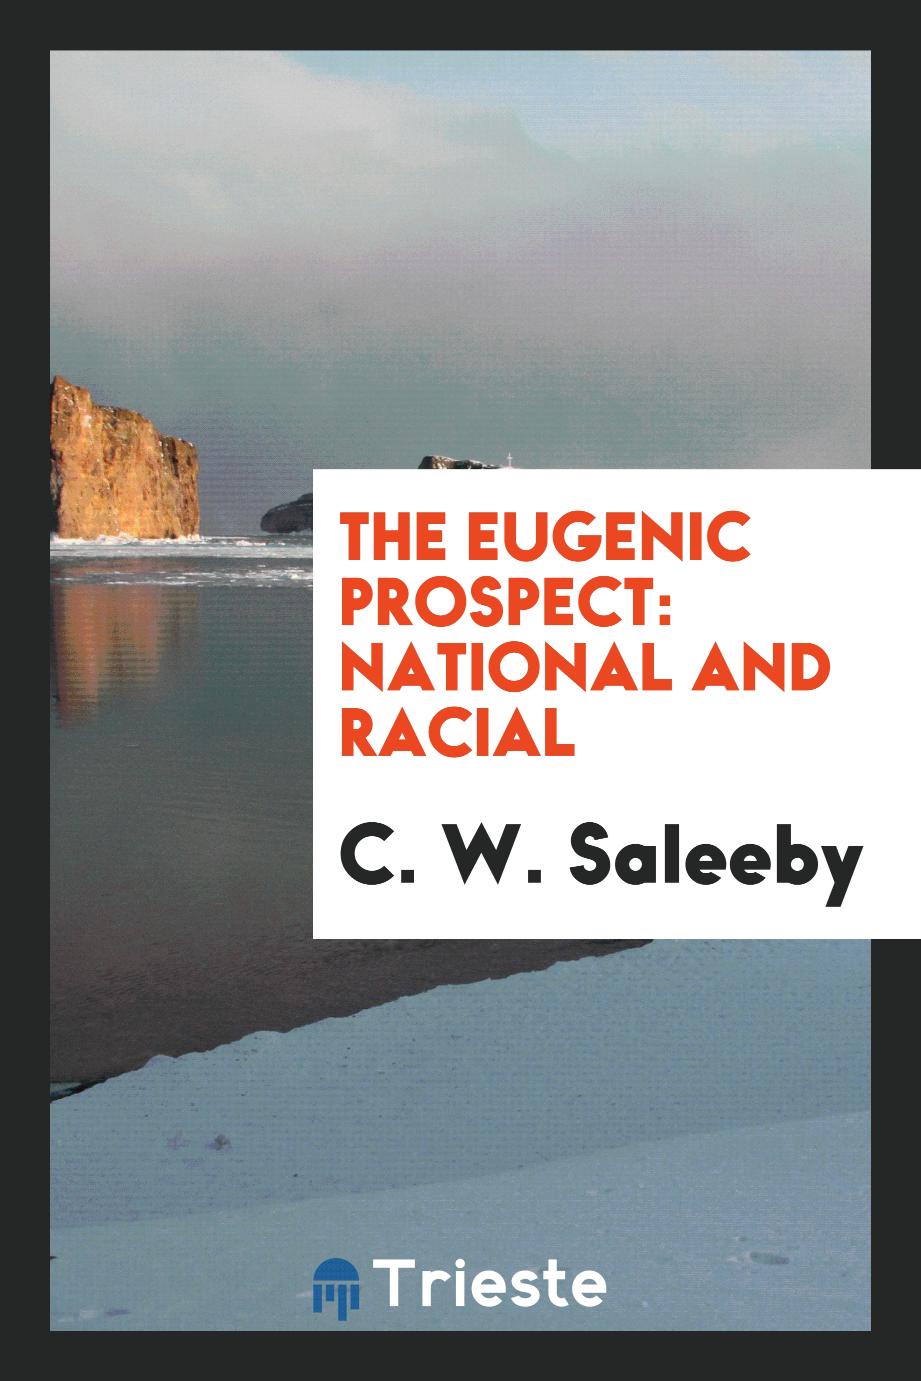 The eugenic prospect: national and racial